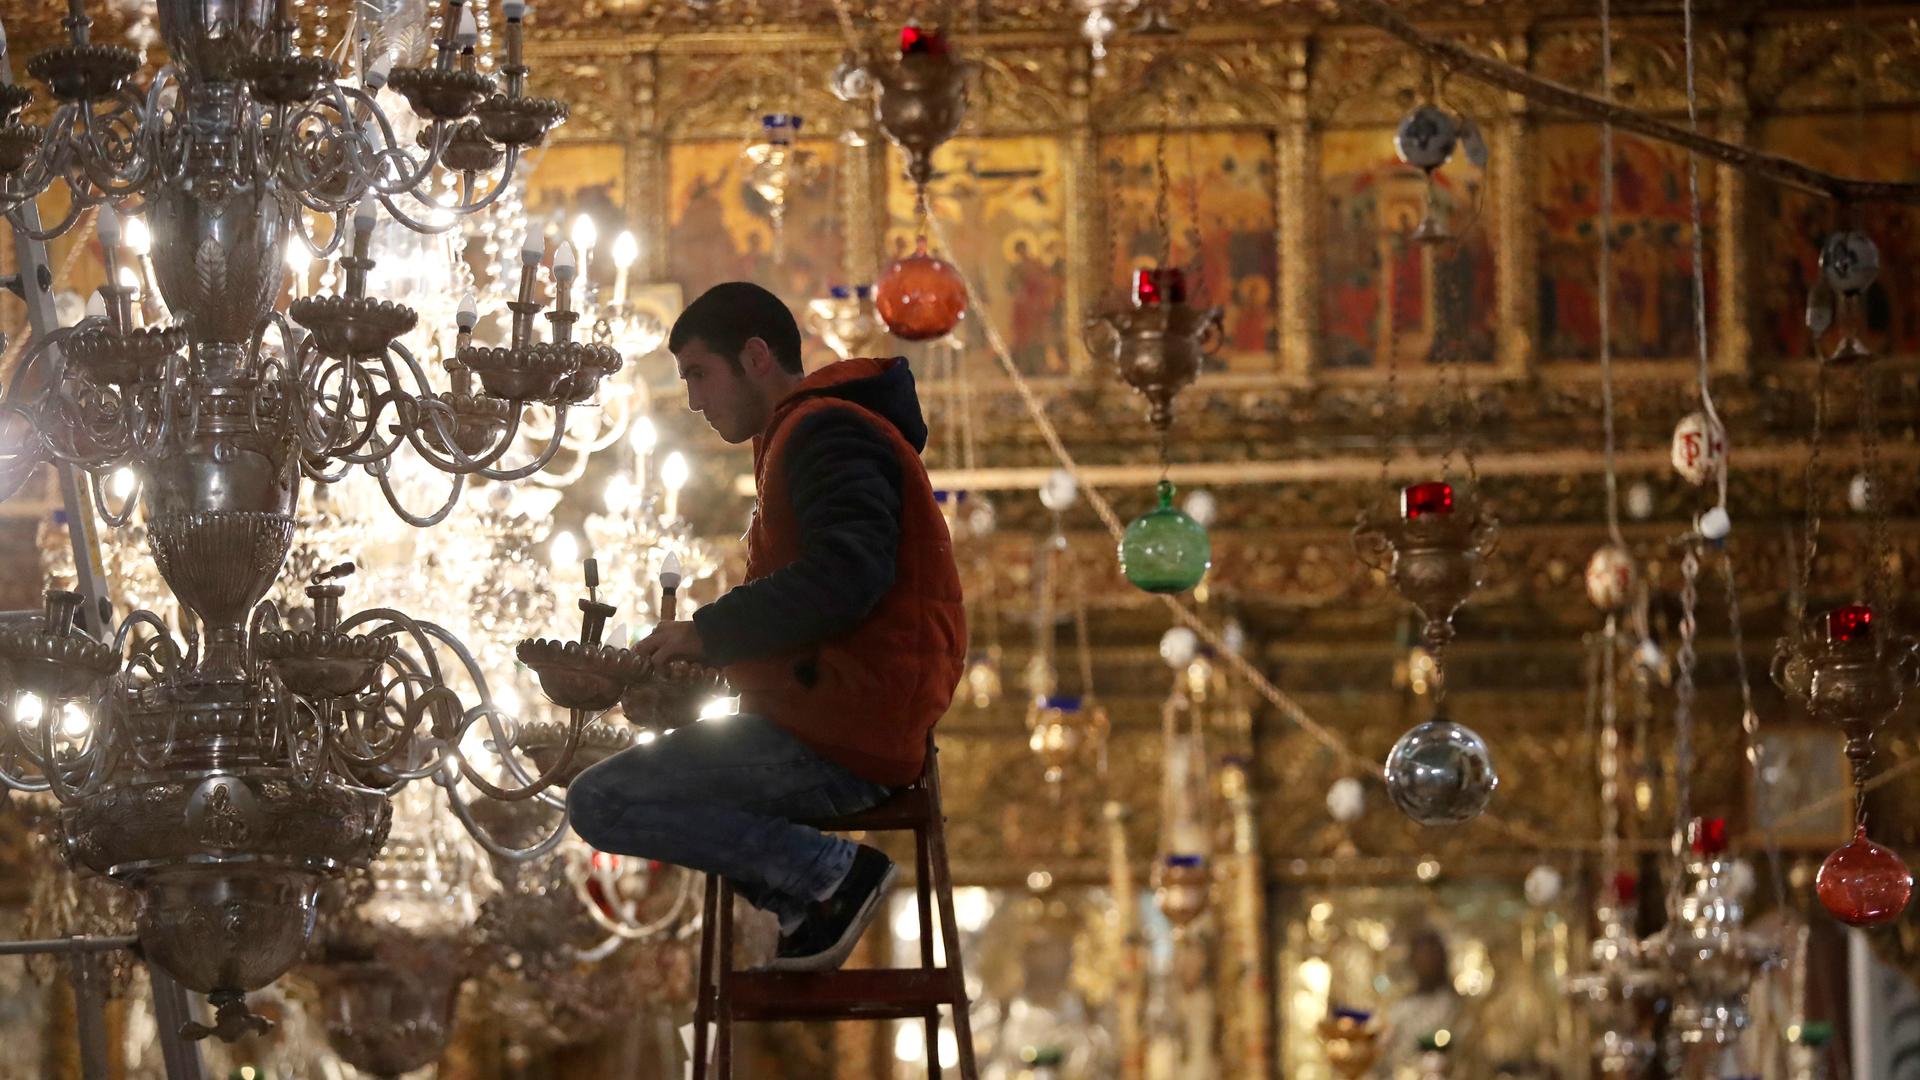 A worker prepares lights ahead of Christmas celebrations in the Church of the Nativity in the West Bank city of Bethlehem, Dec. 19, 2017.